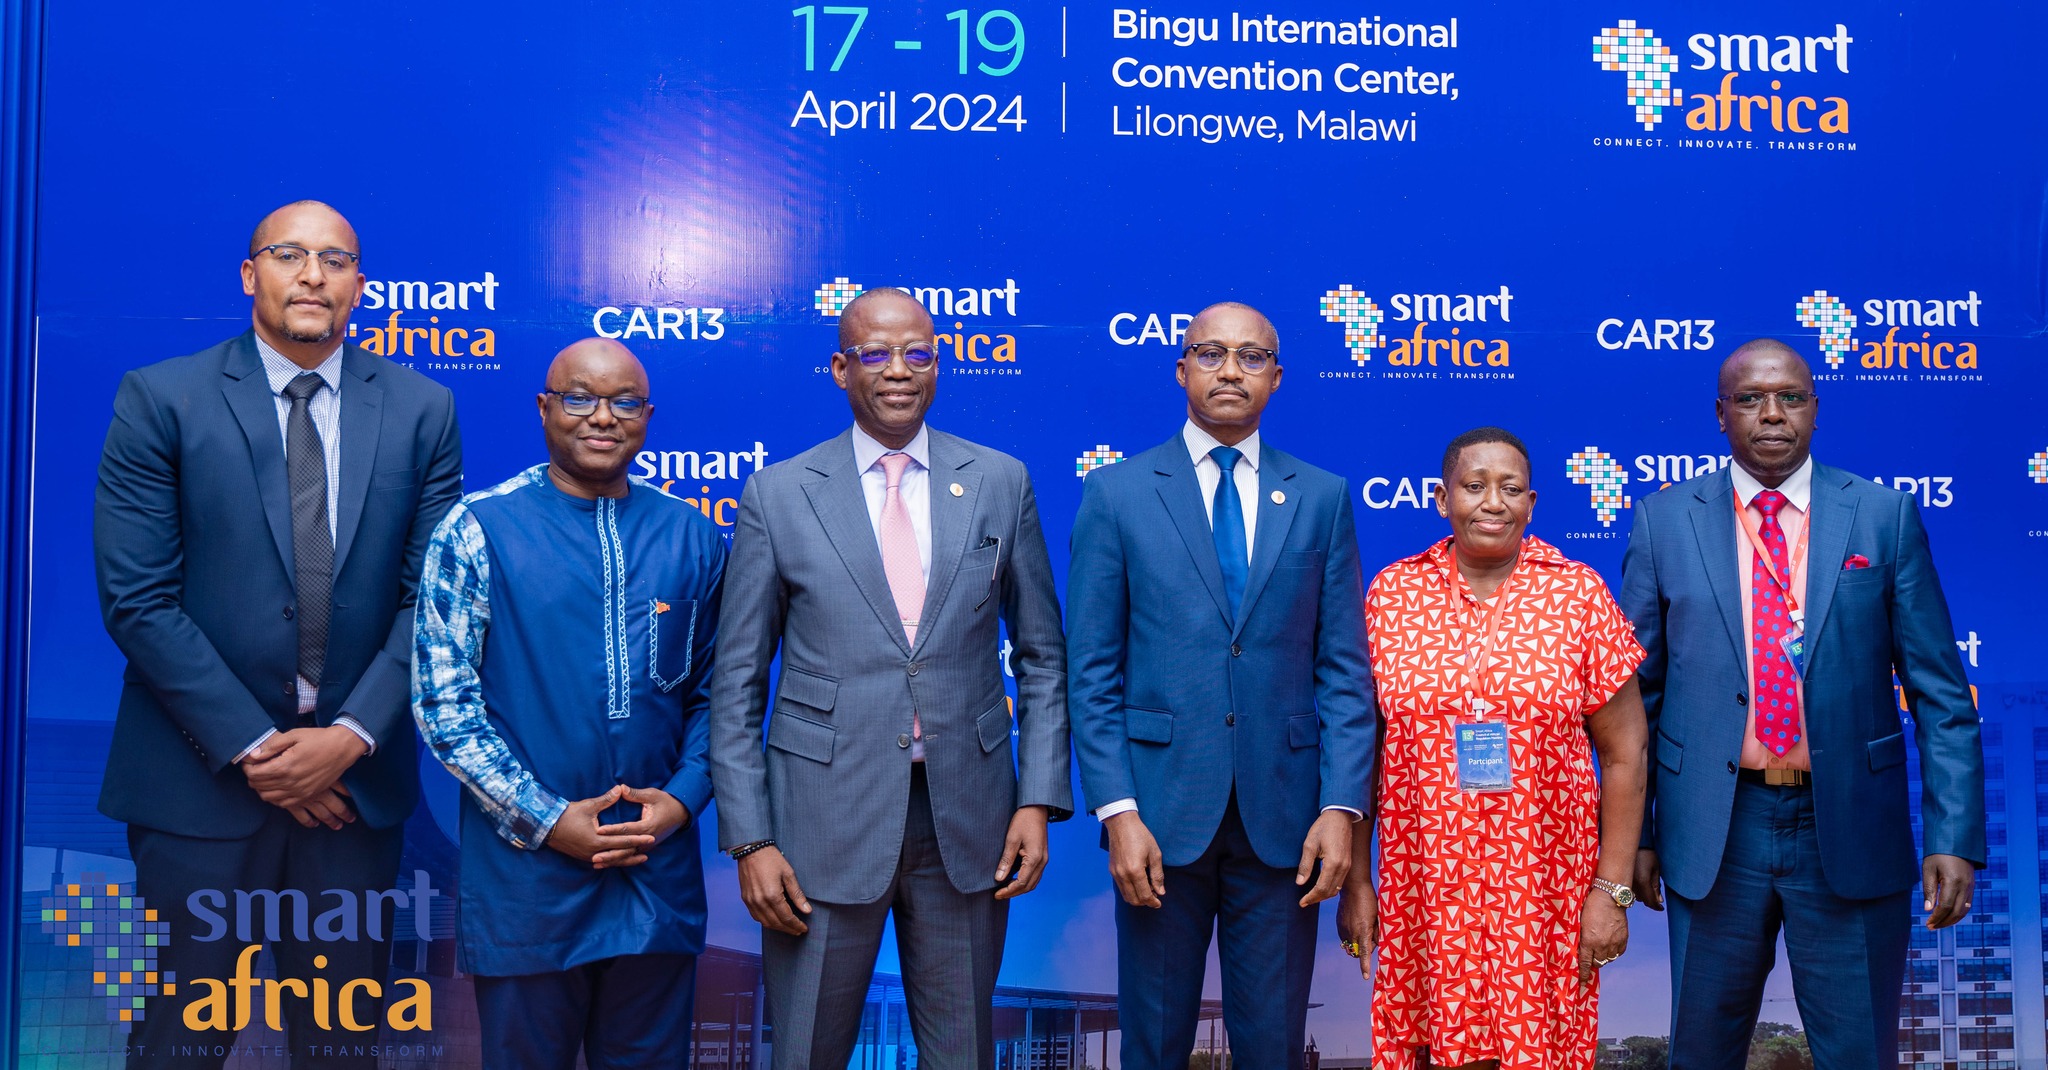 CA Board Chairperson Ms. Mary Mungai (second right) with top leadership of the Smart Africa, upon her election as the Vice Chairperson of the Smart Africa Council of African Regulators in Lilongwe, Malawi